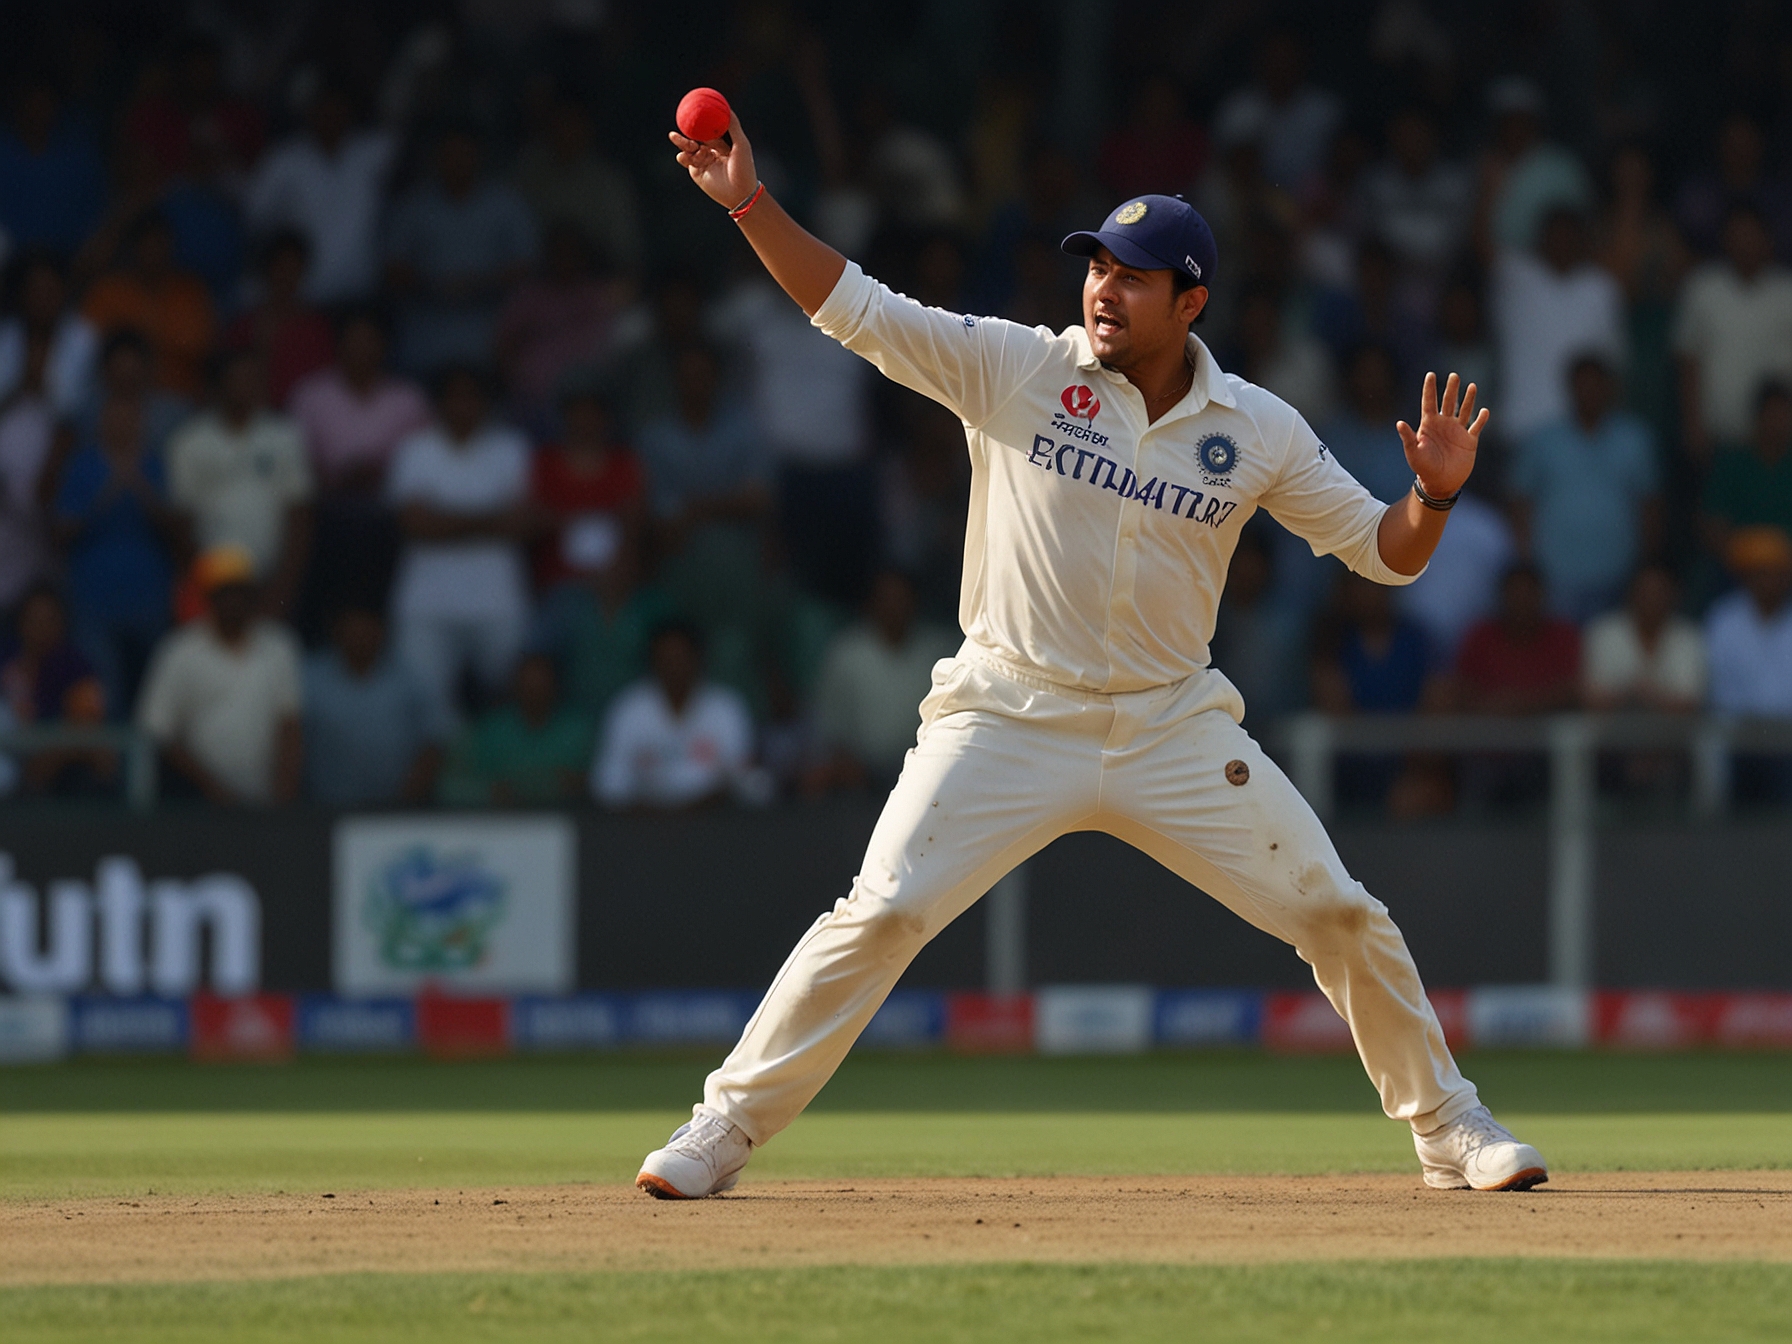 Kuldeep Yadav, in mid-action, delivering a spin ball during a high-stakes match, with a focused expression and fans cheering in the background, showcasing his 'Super 8 specialist' role.